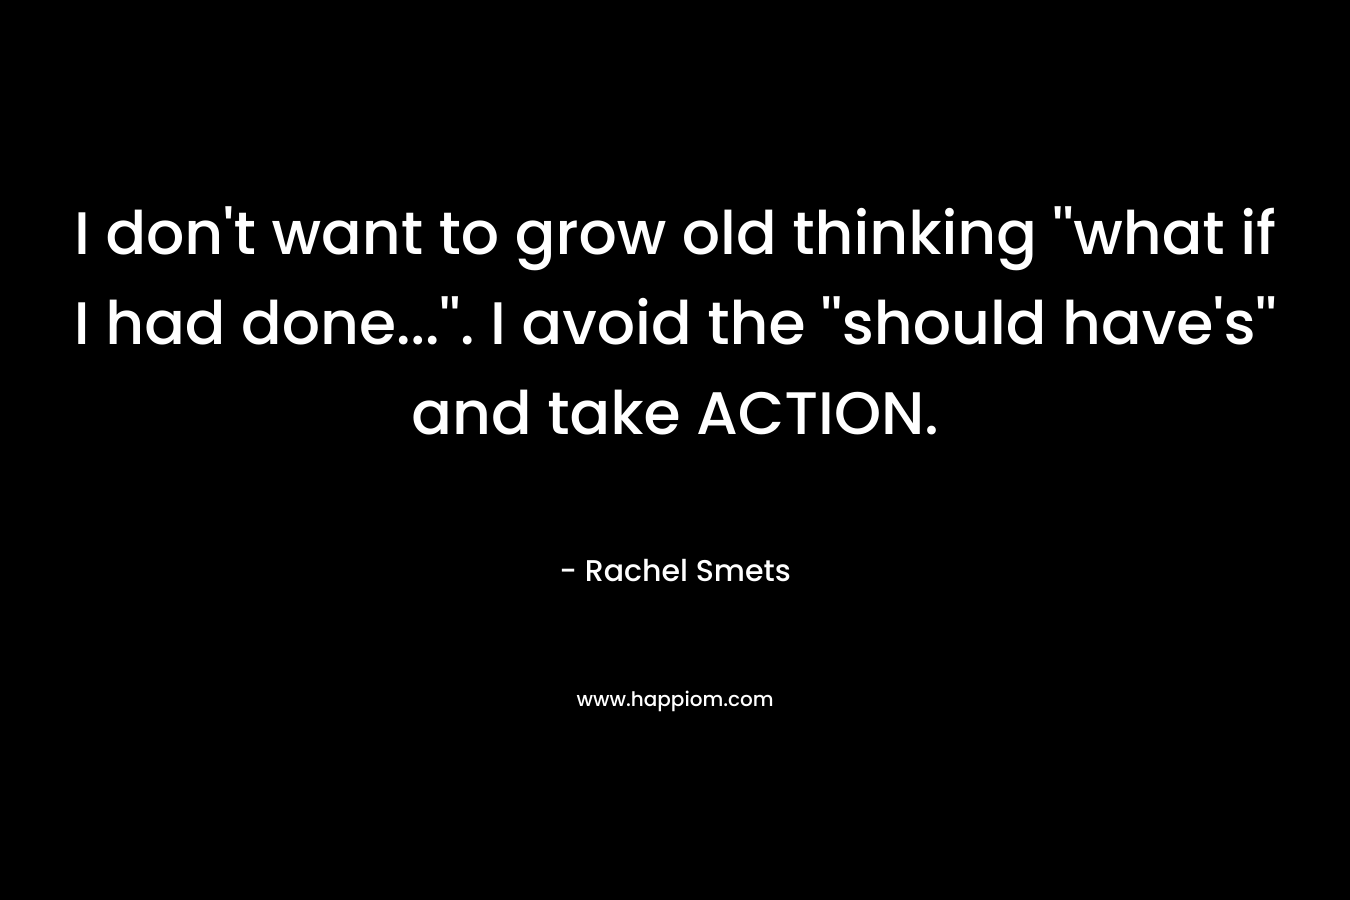 I don't want to grow old thinking ''what if I had done...''. I avoid the ''should have's'' and take ACTION.